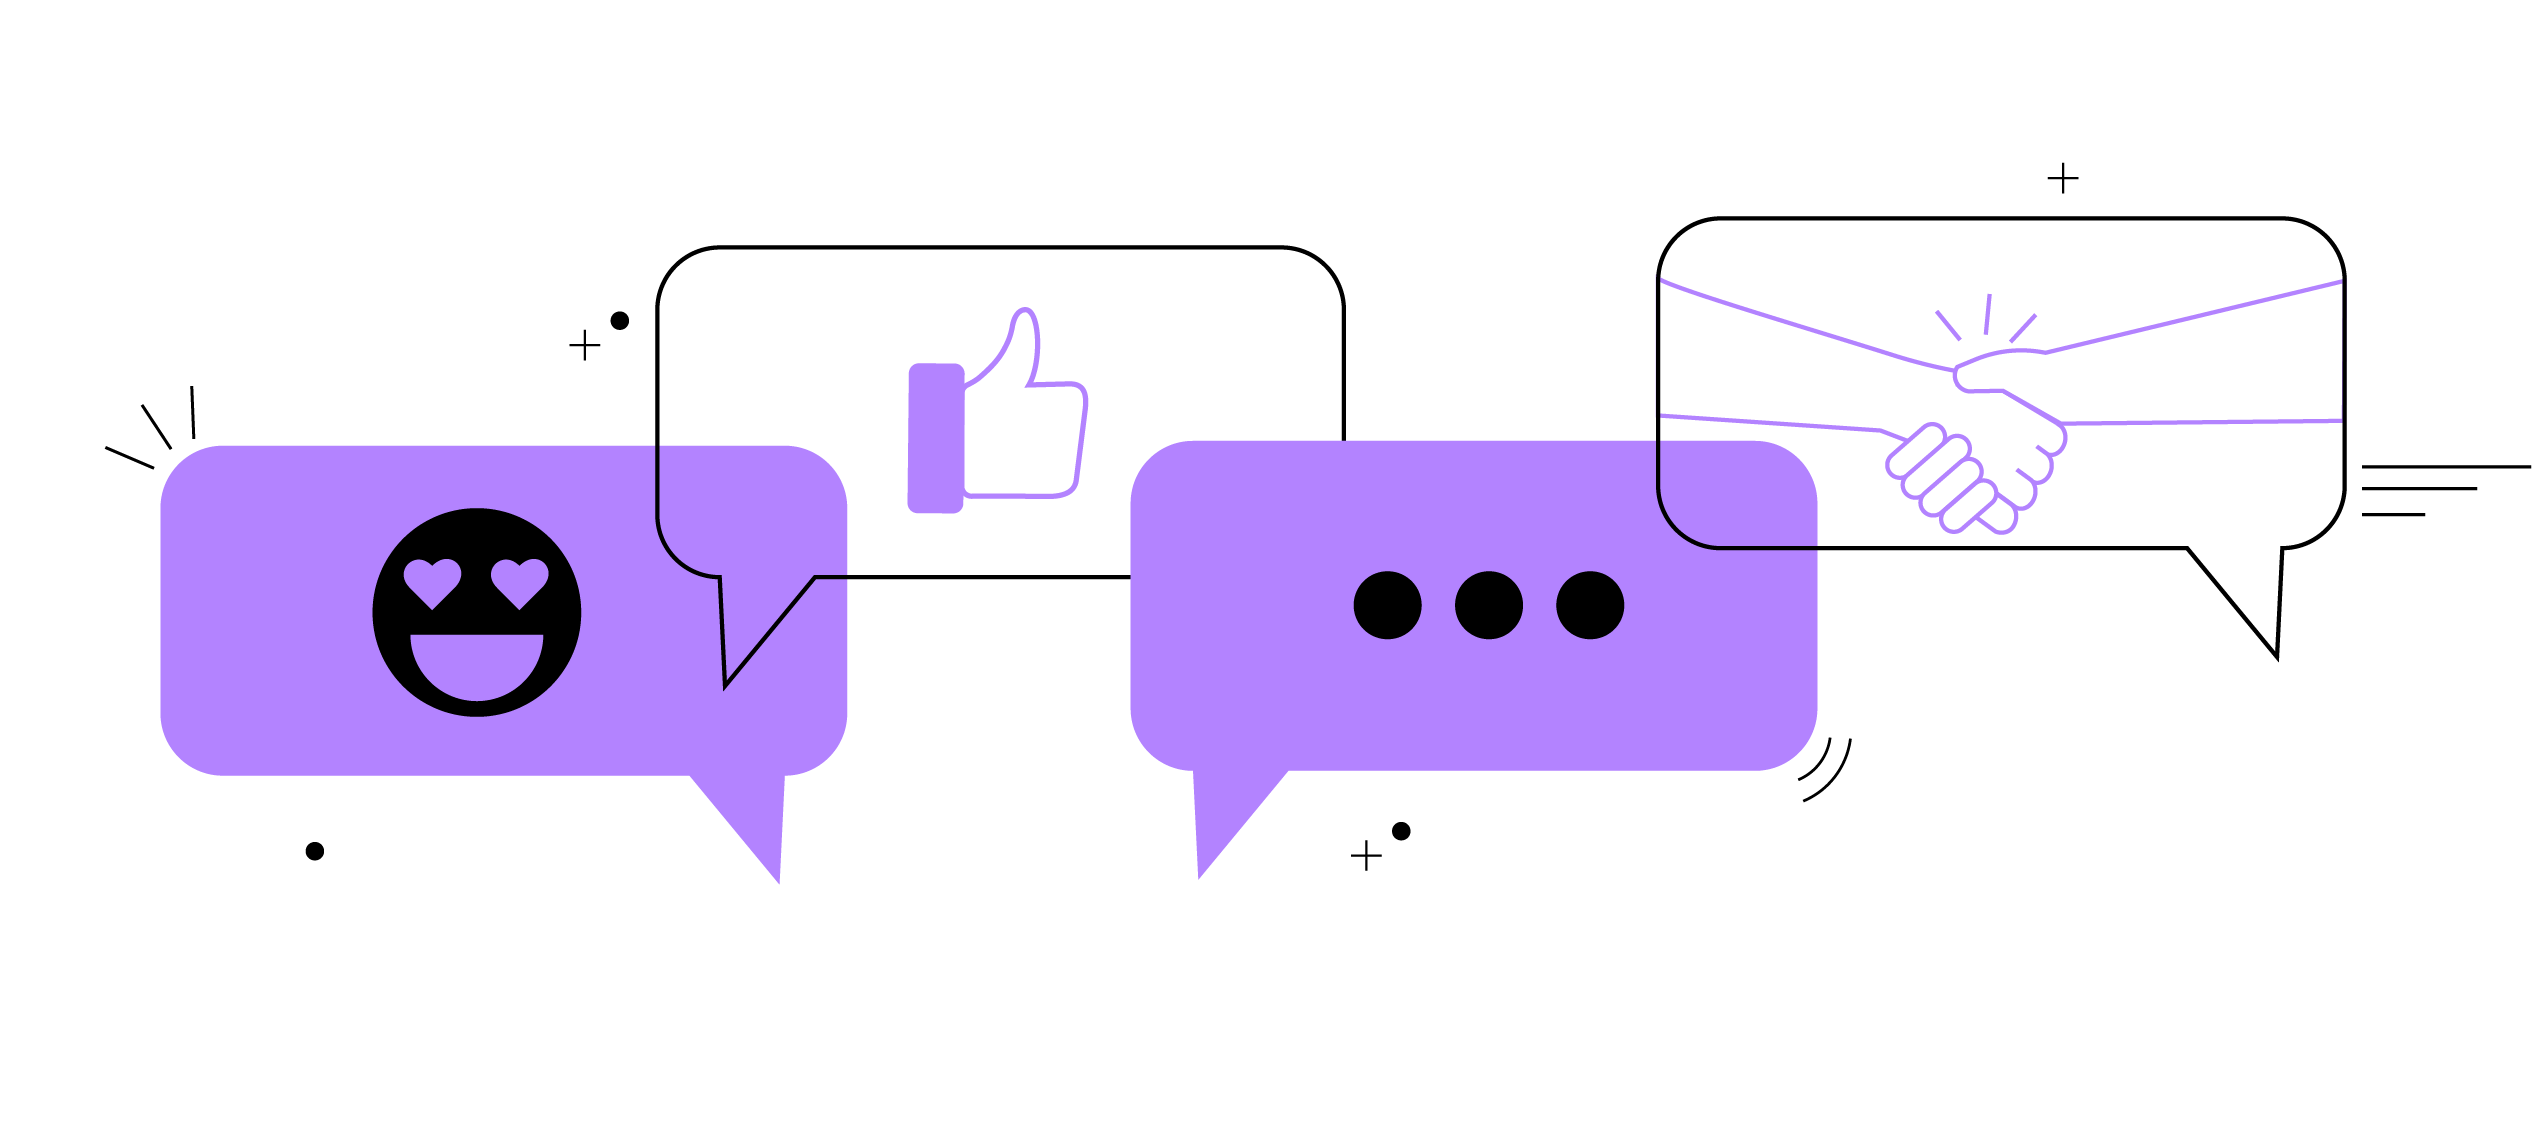 Four text bubbles with different social icons in each one: A smiley face with heart eyes, a thumbs up, shaking hands, and a message loading icon.